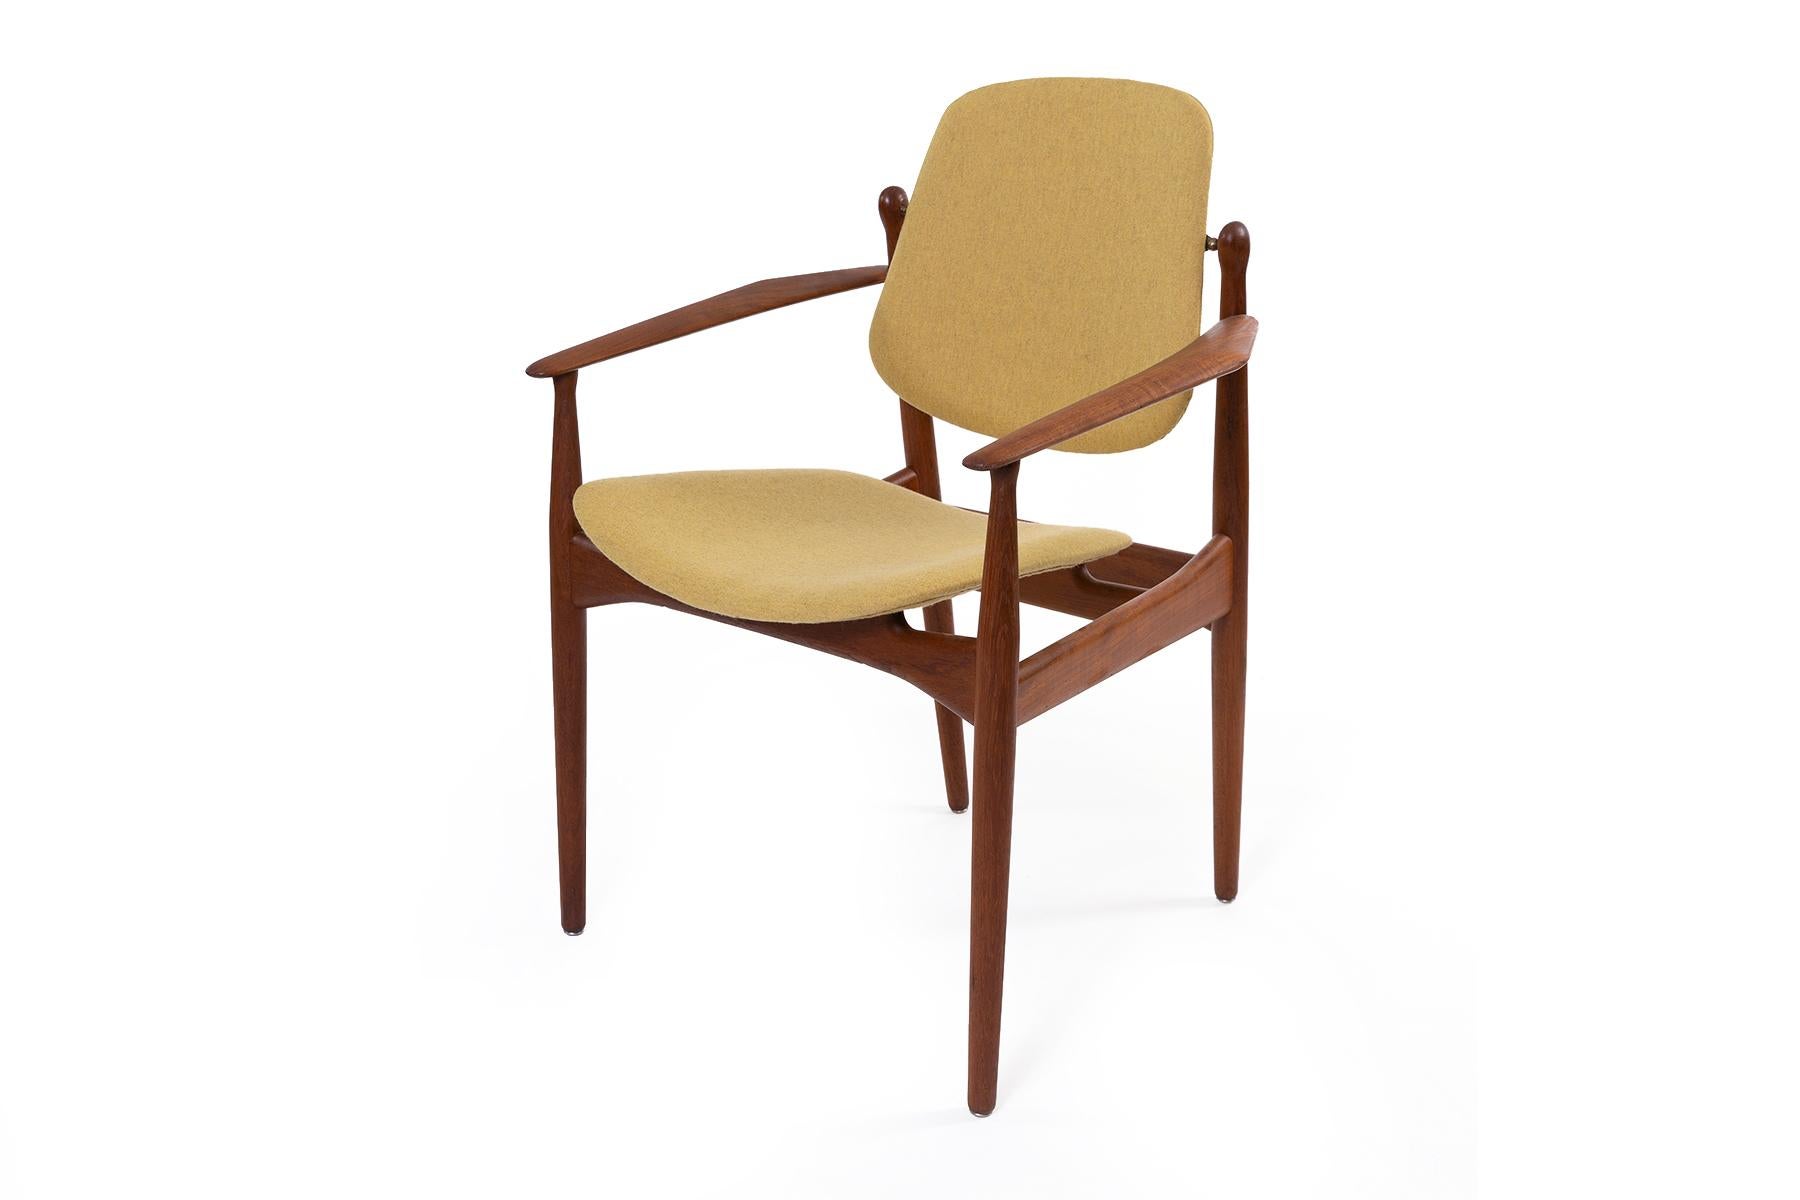 8 solid teak and brass Danish dining chairs by Peter Hvidt. Newly upholstered in mustard Perry wool. Collection includes two armchairs measuring 25